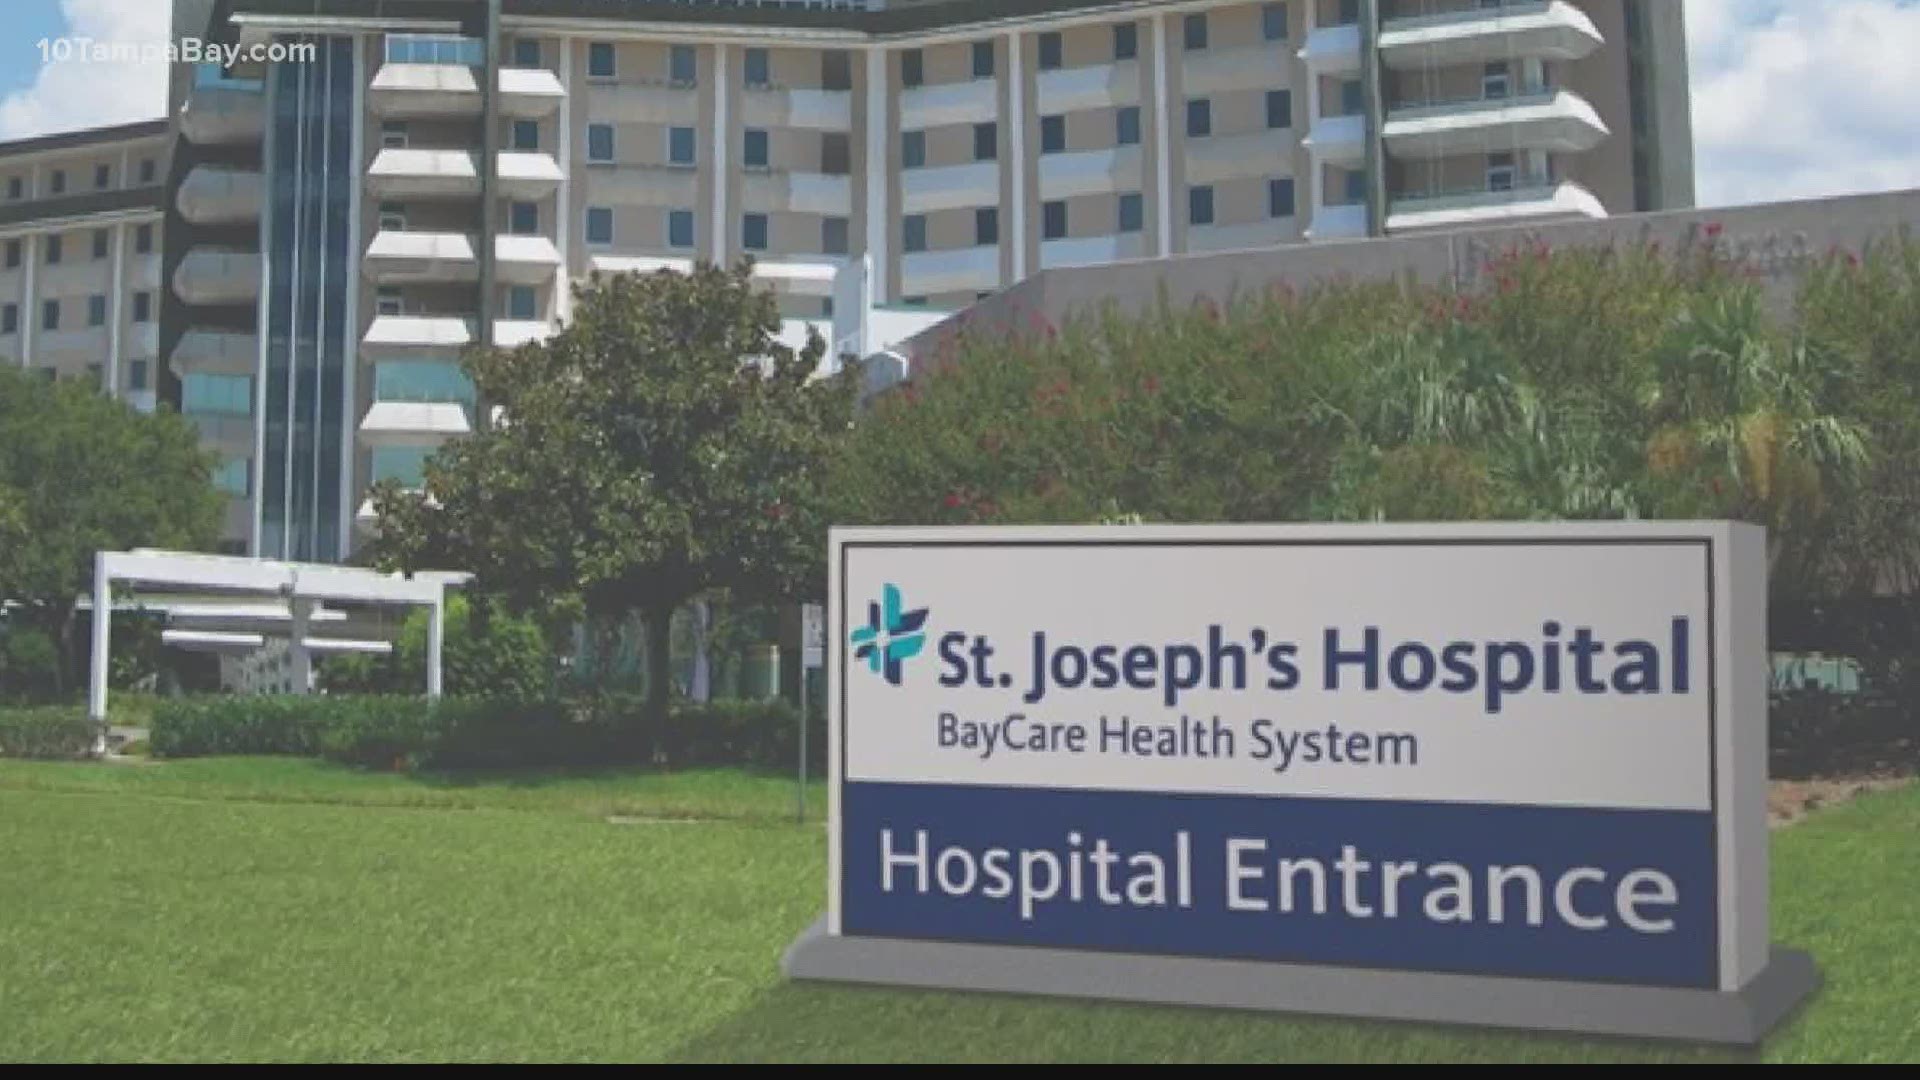 Kathryn and Travis Wilson are suing the Tampa hospital after they say the staff lost the body of their son, who died three days after his birth.